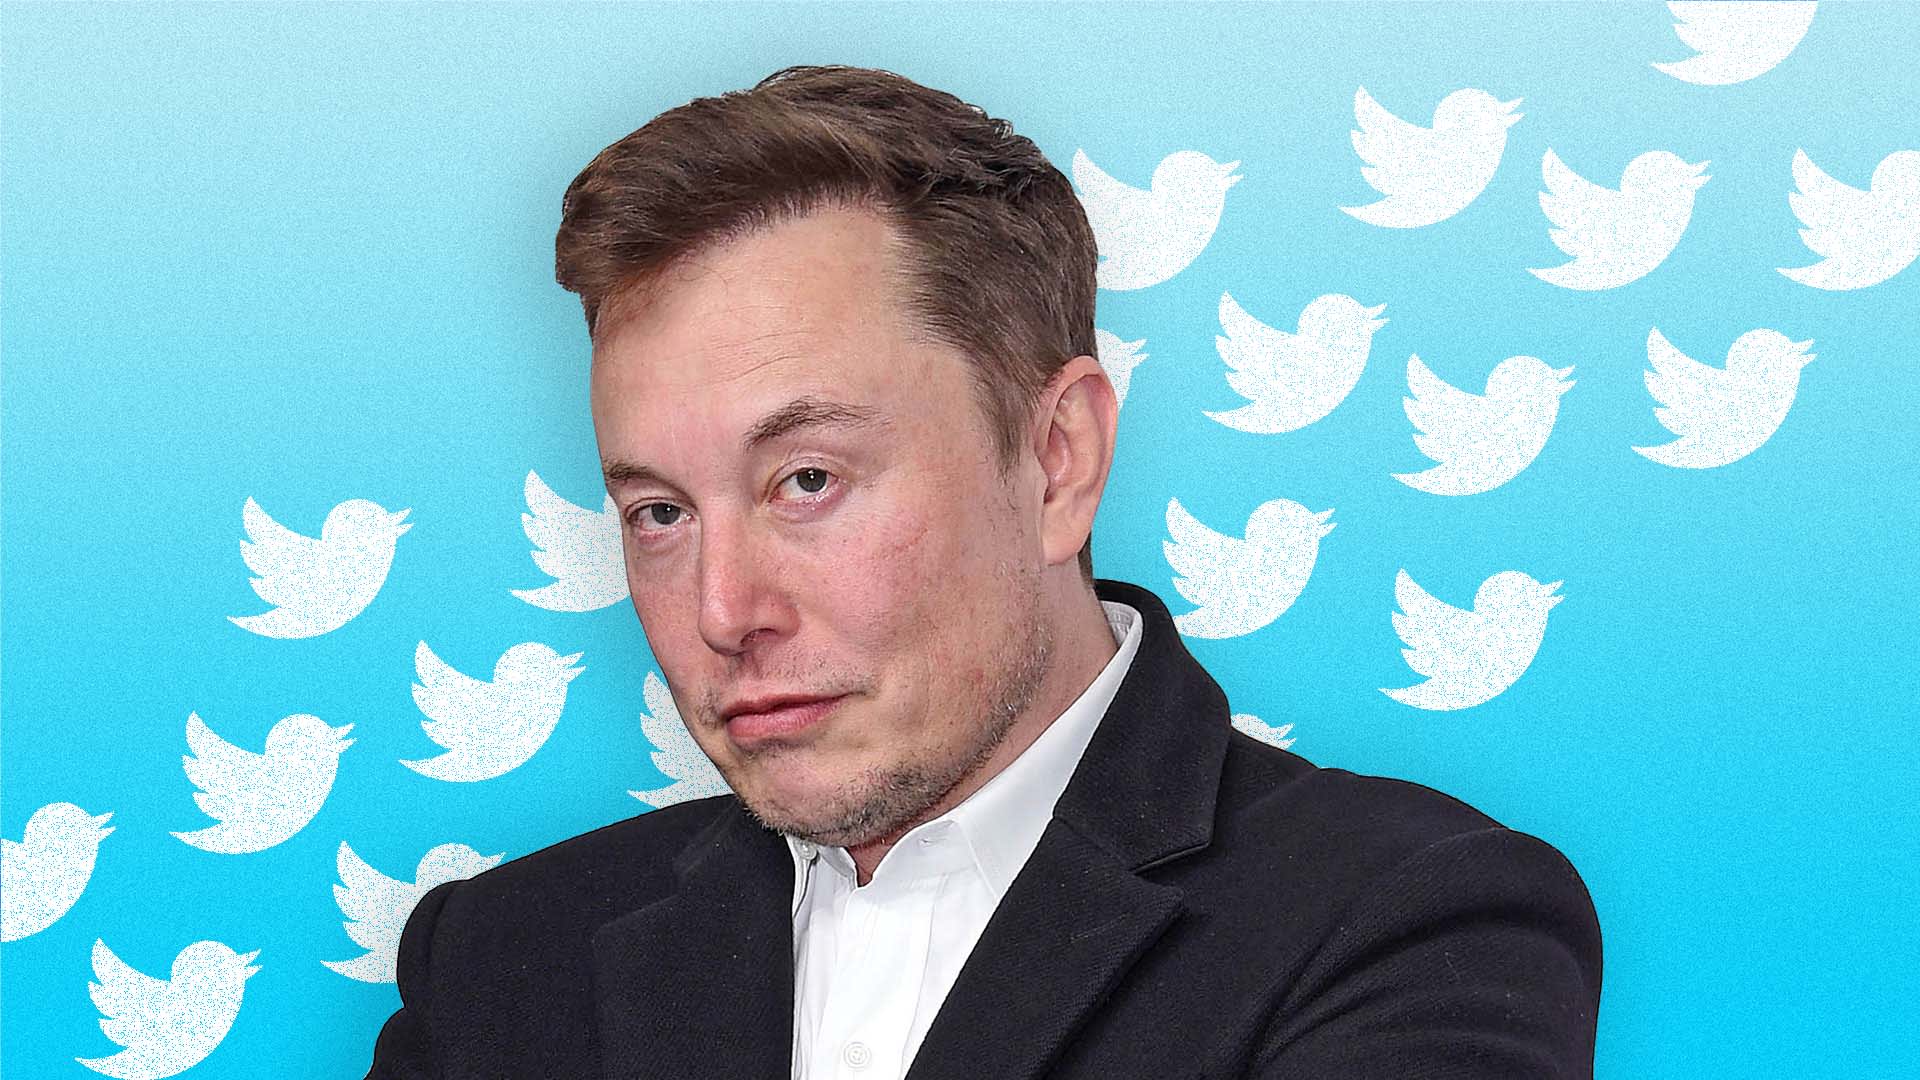 Is Elon Musk on to Something? New Study Finds Frequent Tweeting Helps You Rise to the Top in Business